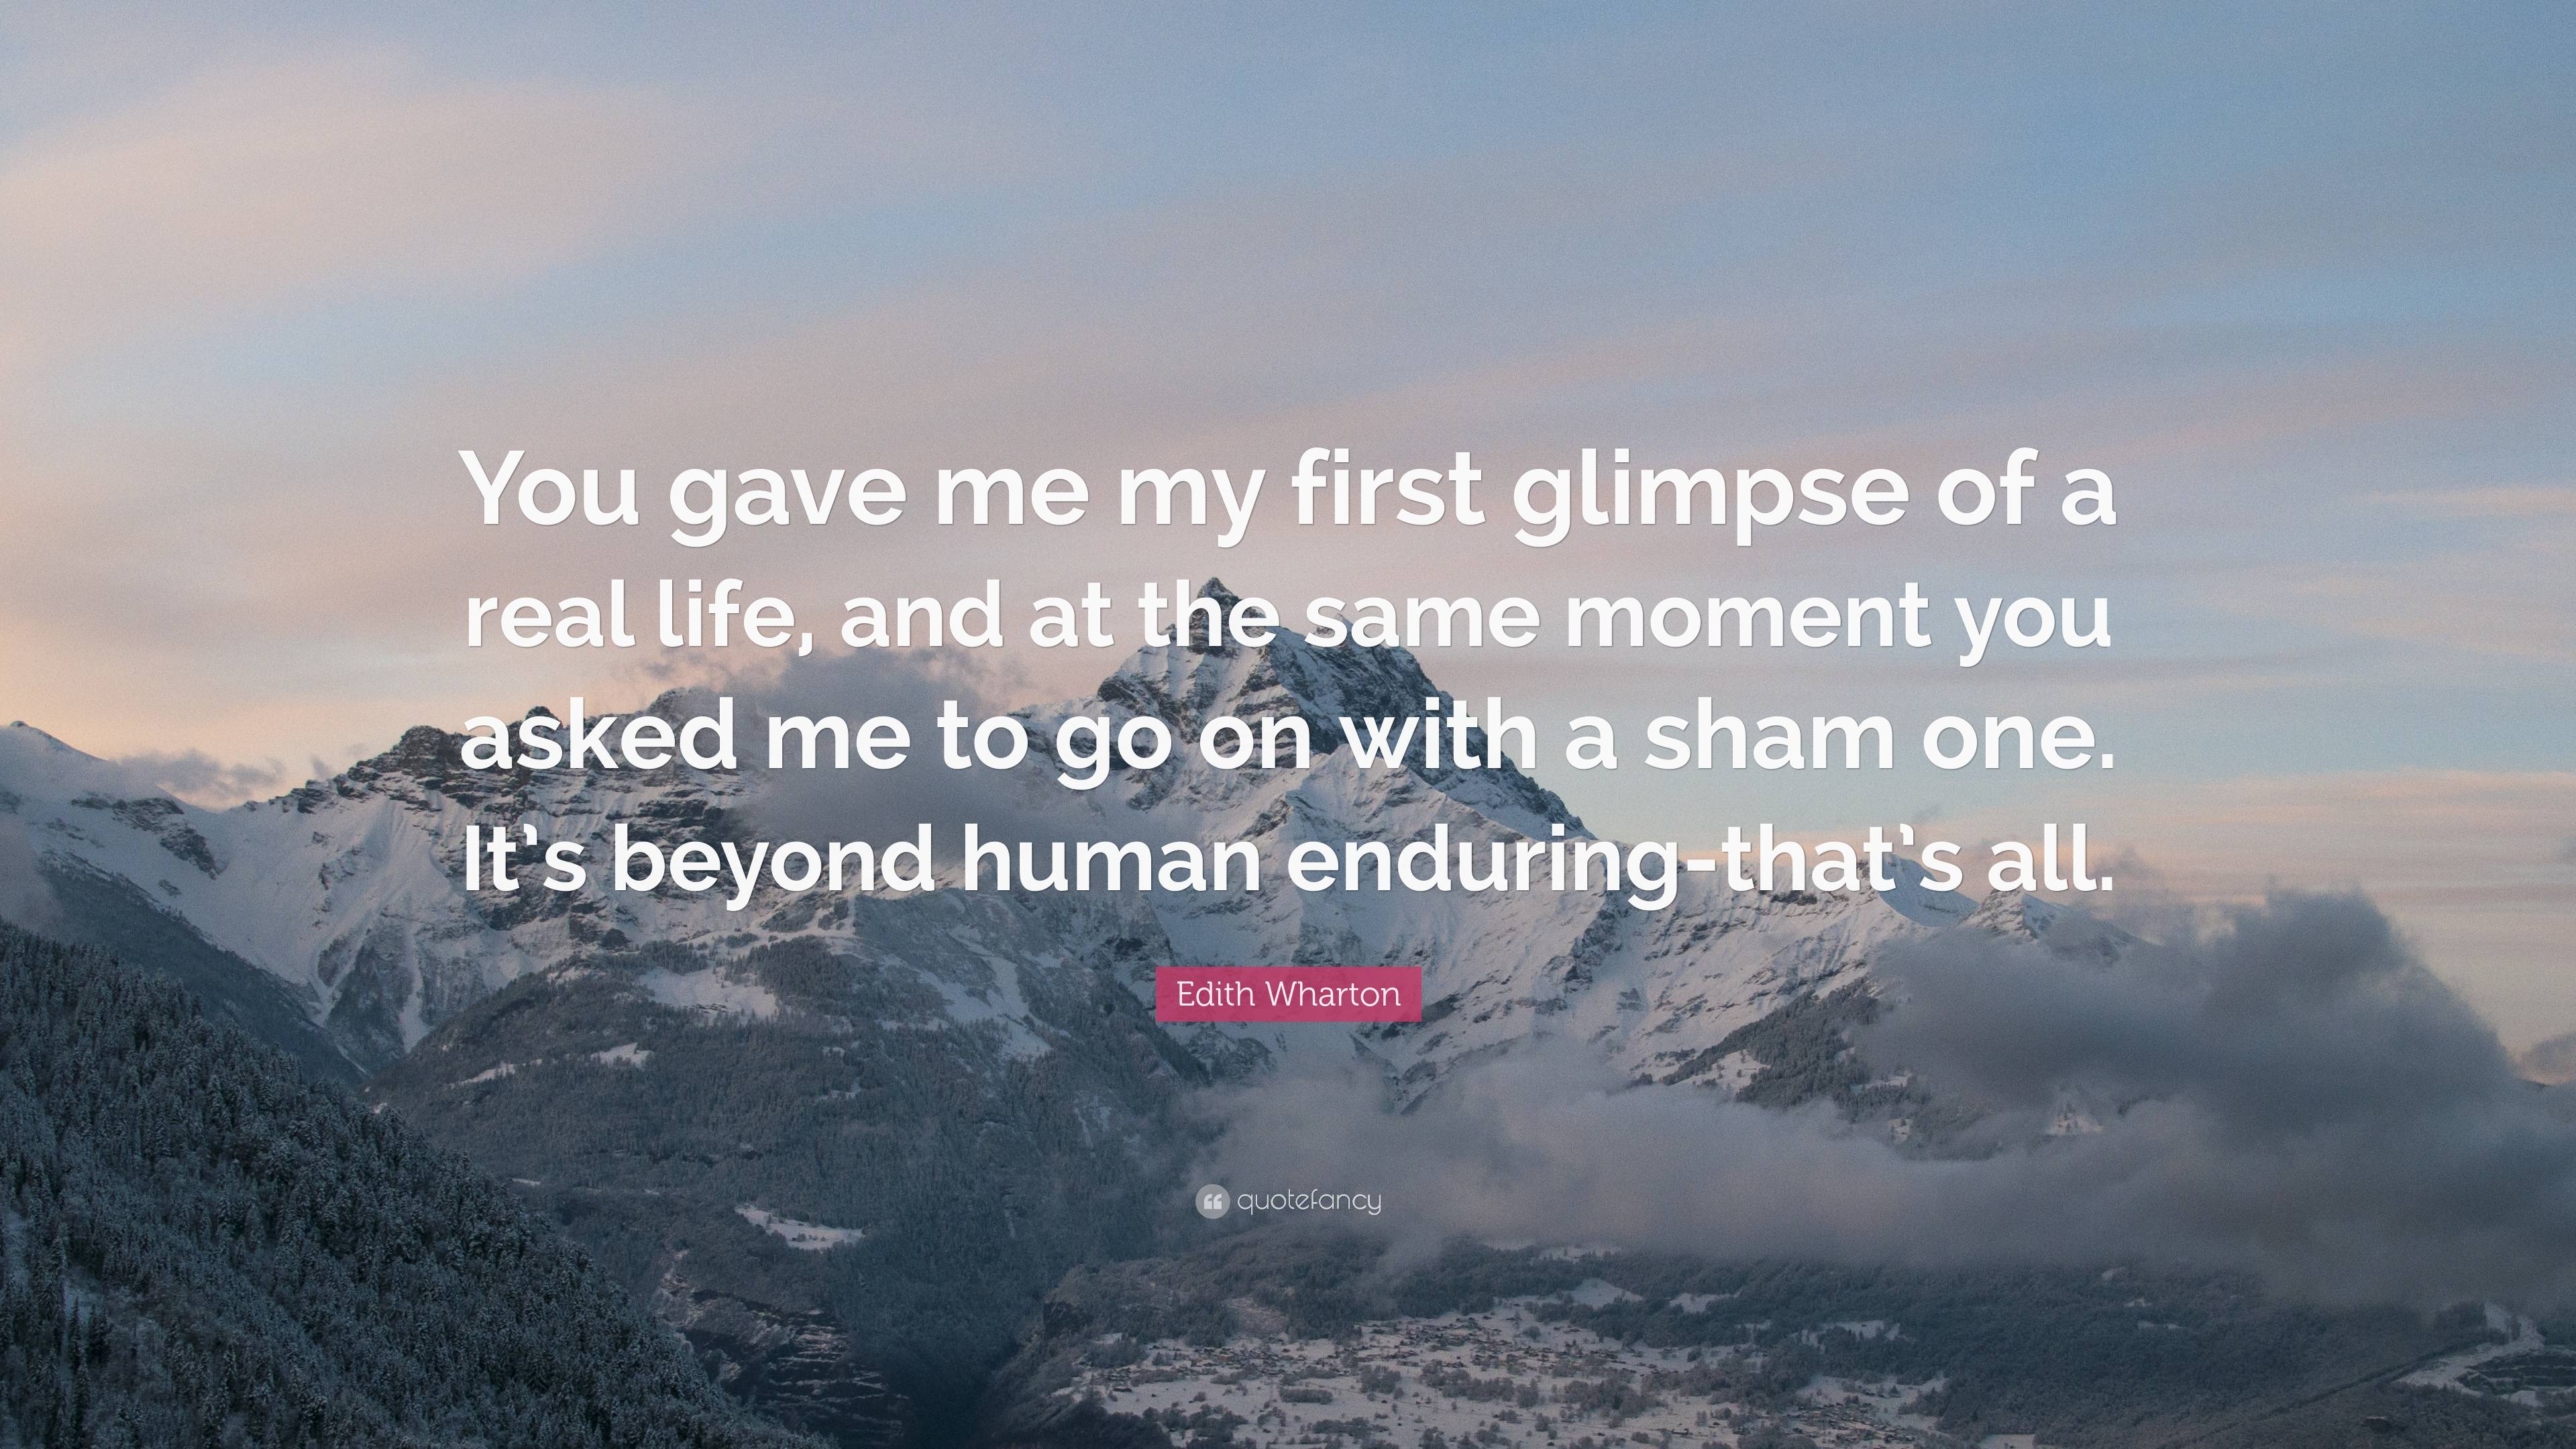 Edith Wharton Quote: “You gave me my first glimpse of a real life, and ...